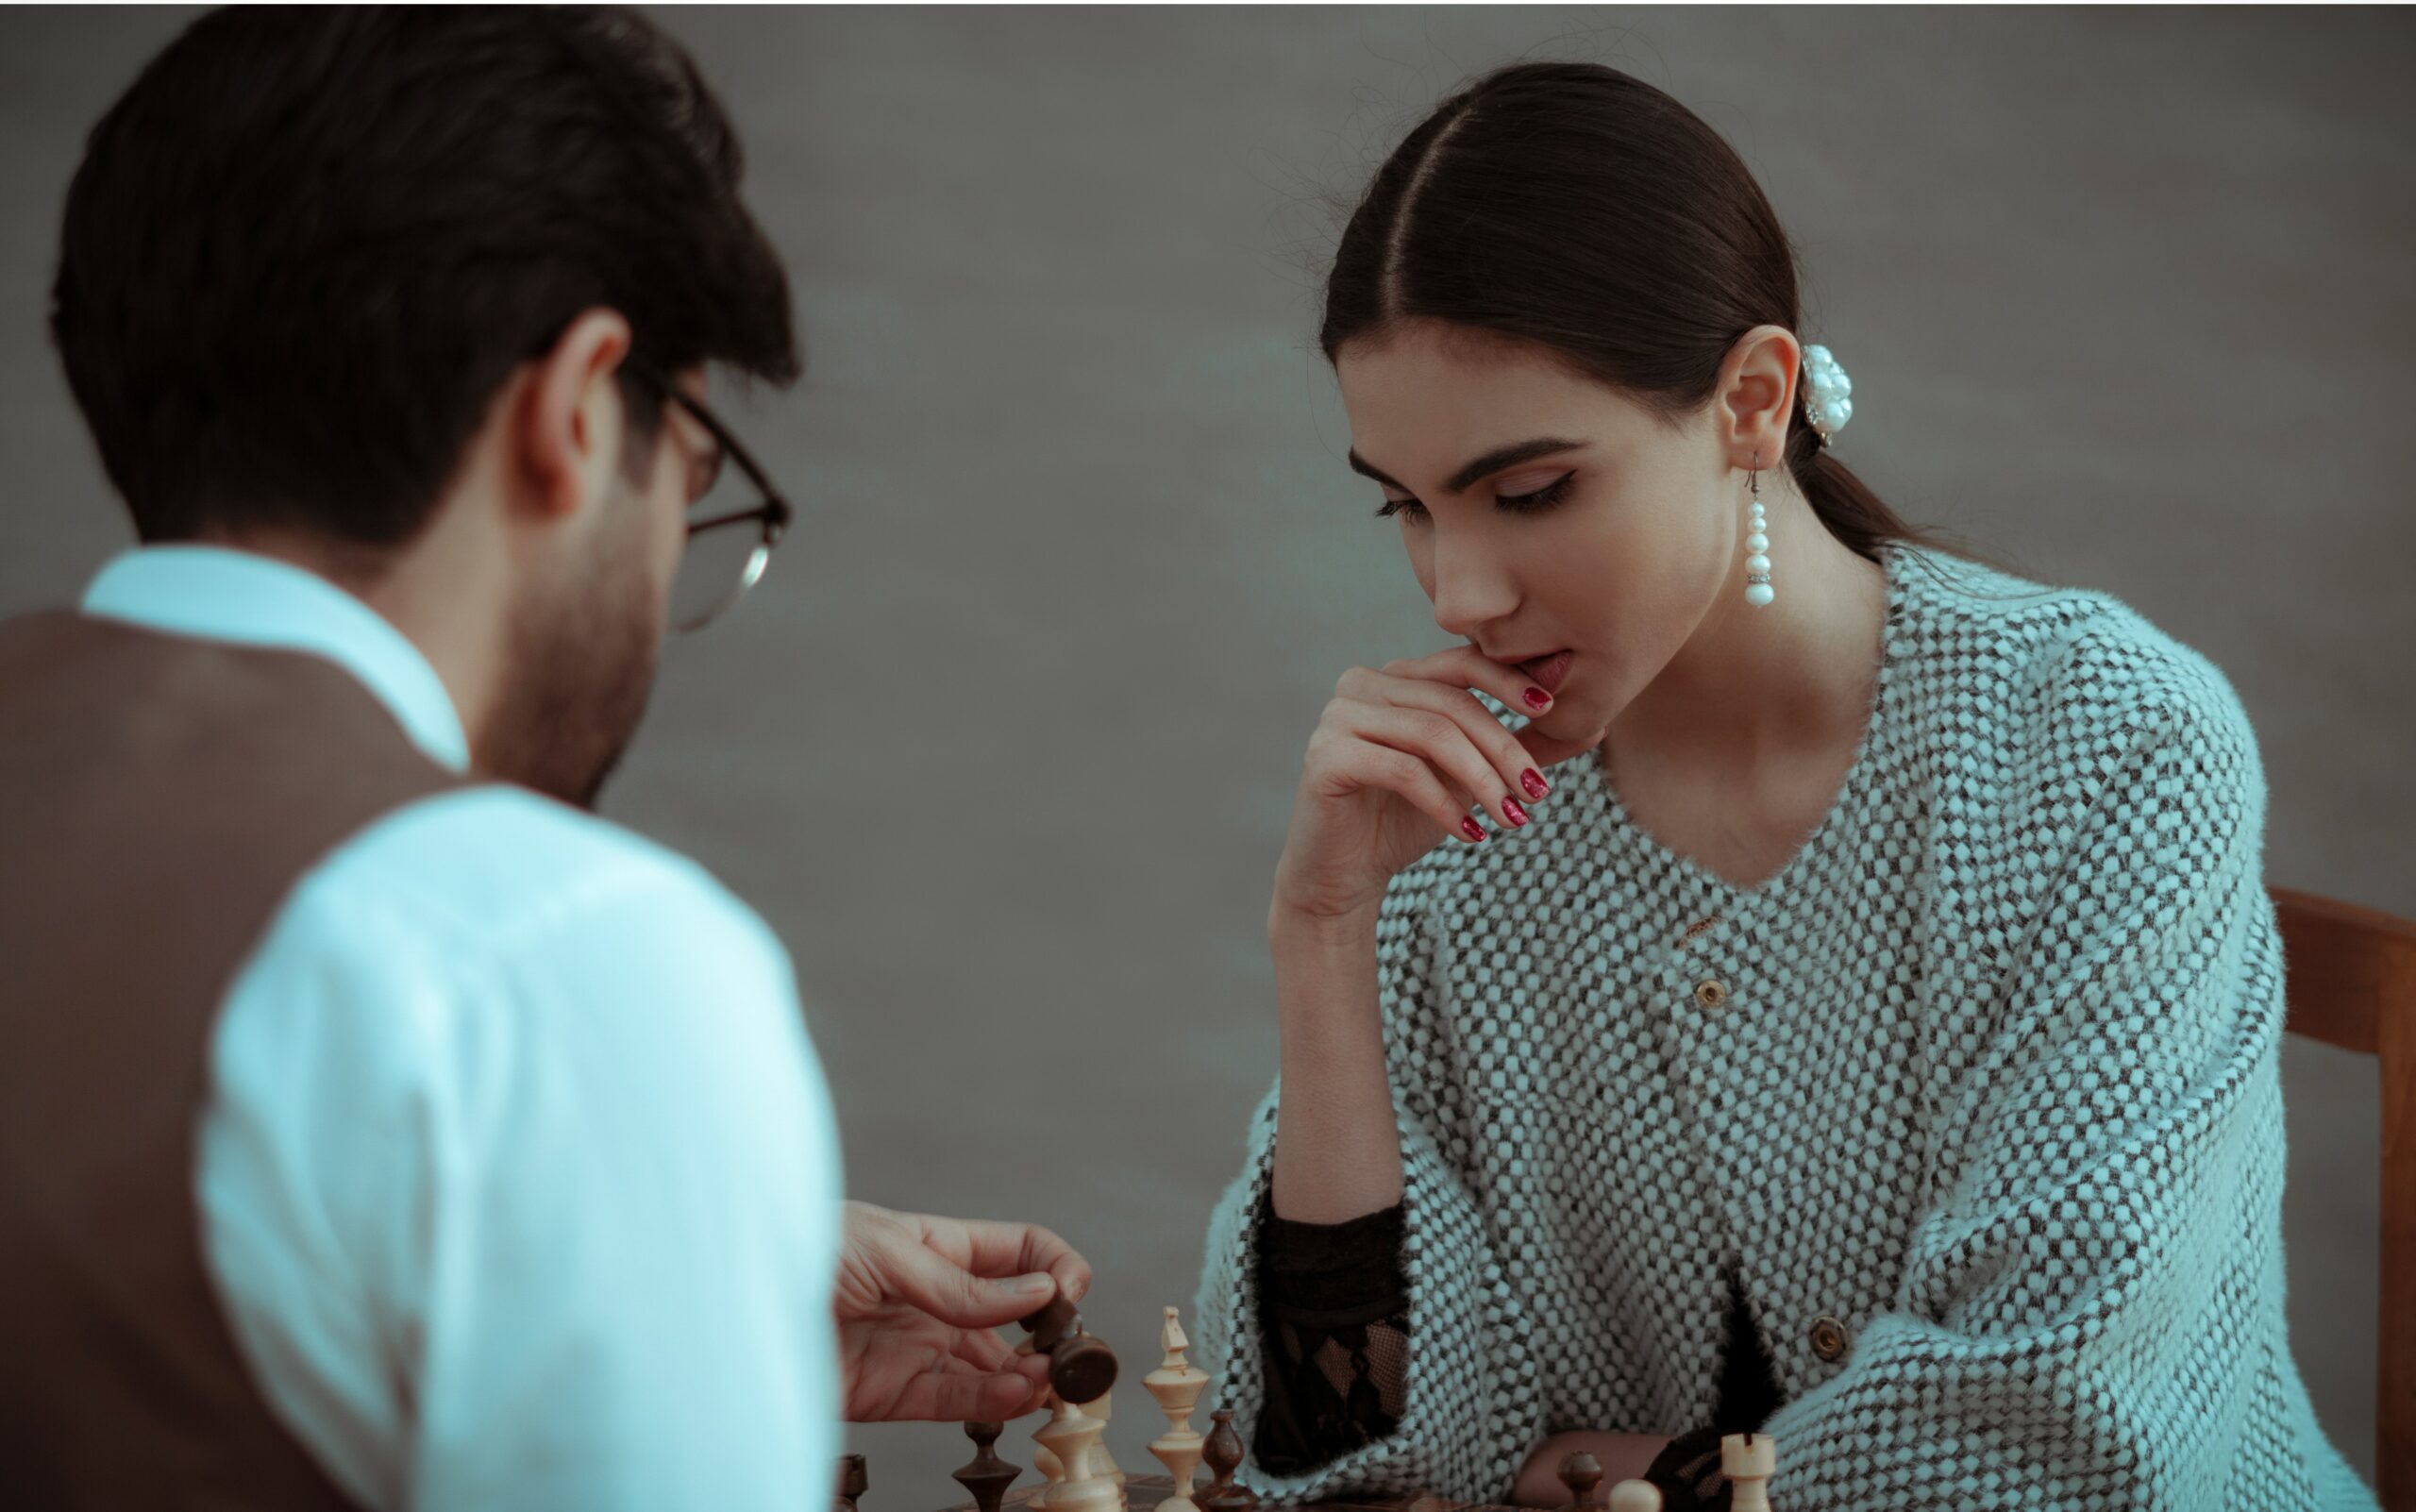 Chess is generally considered a sedentary game